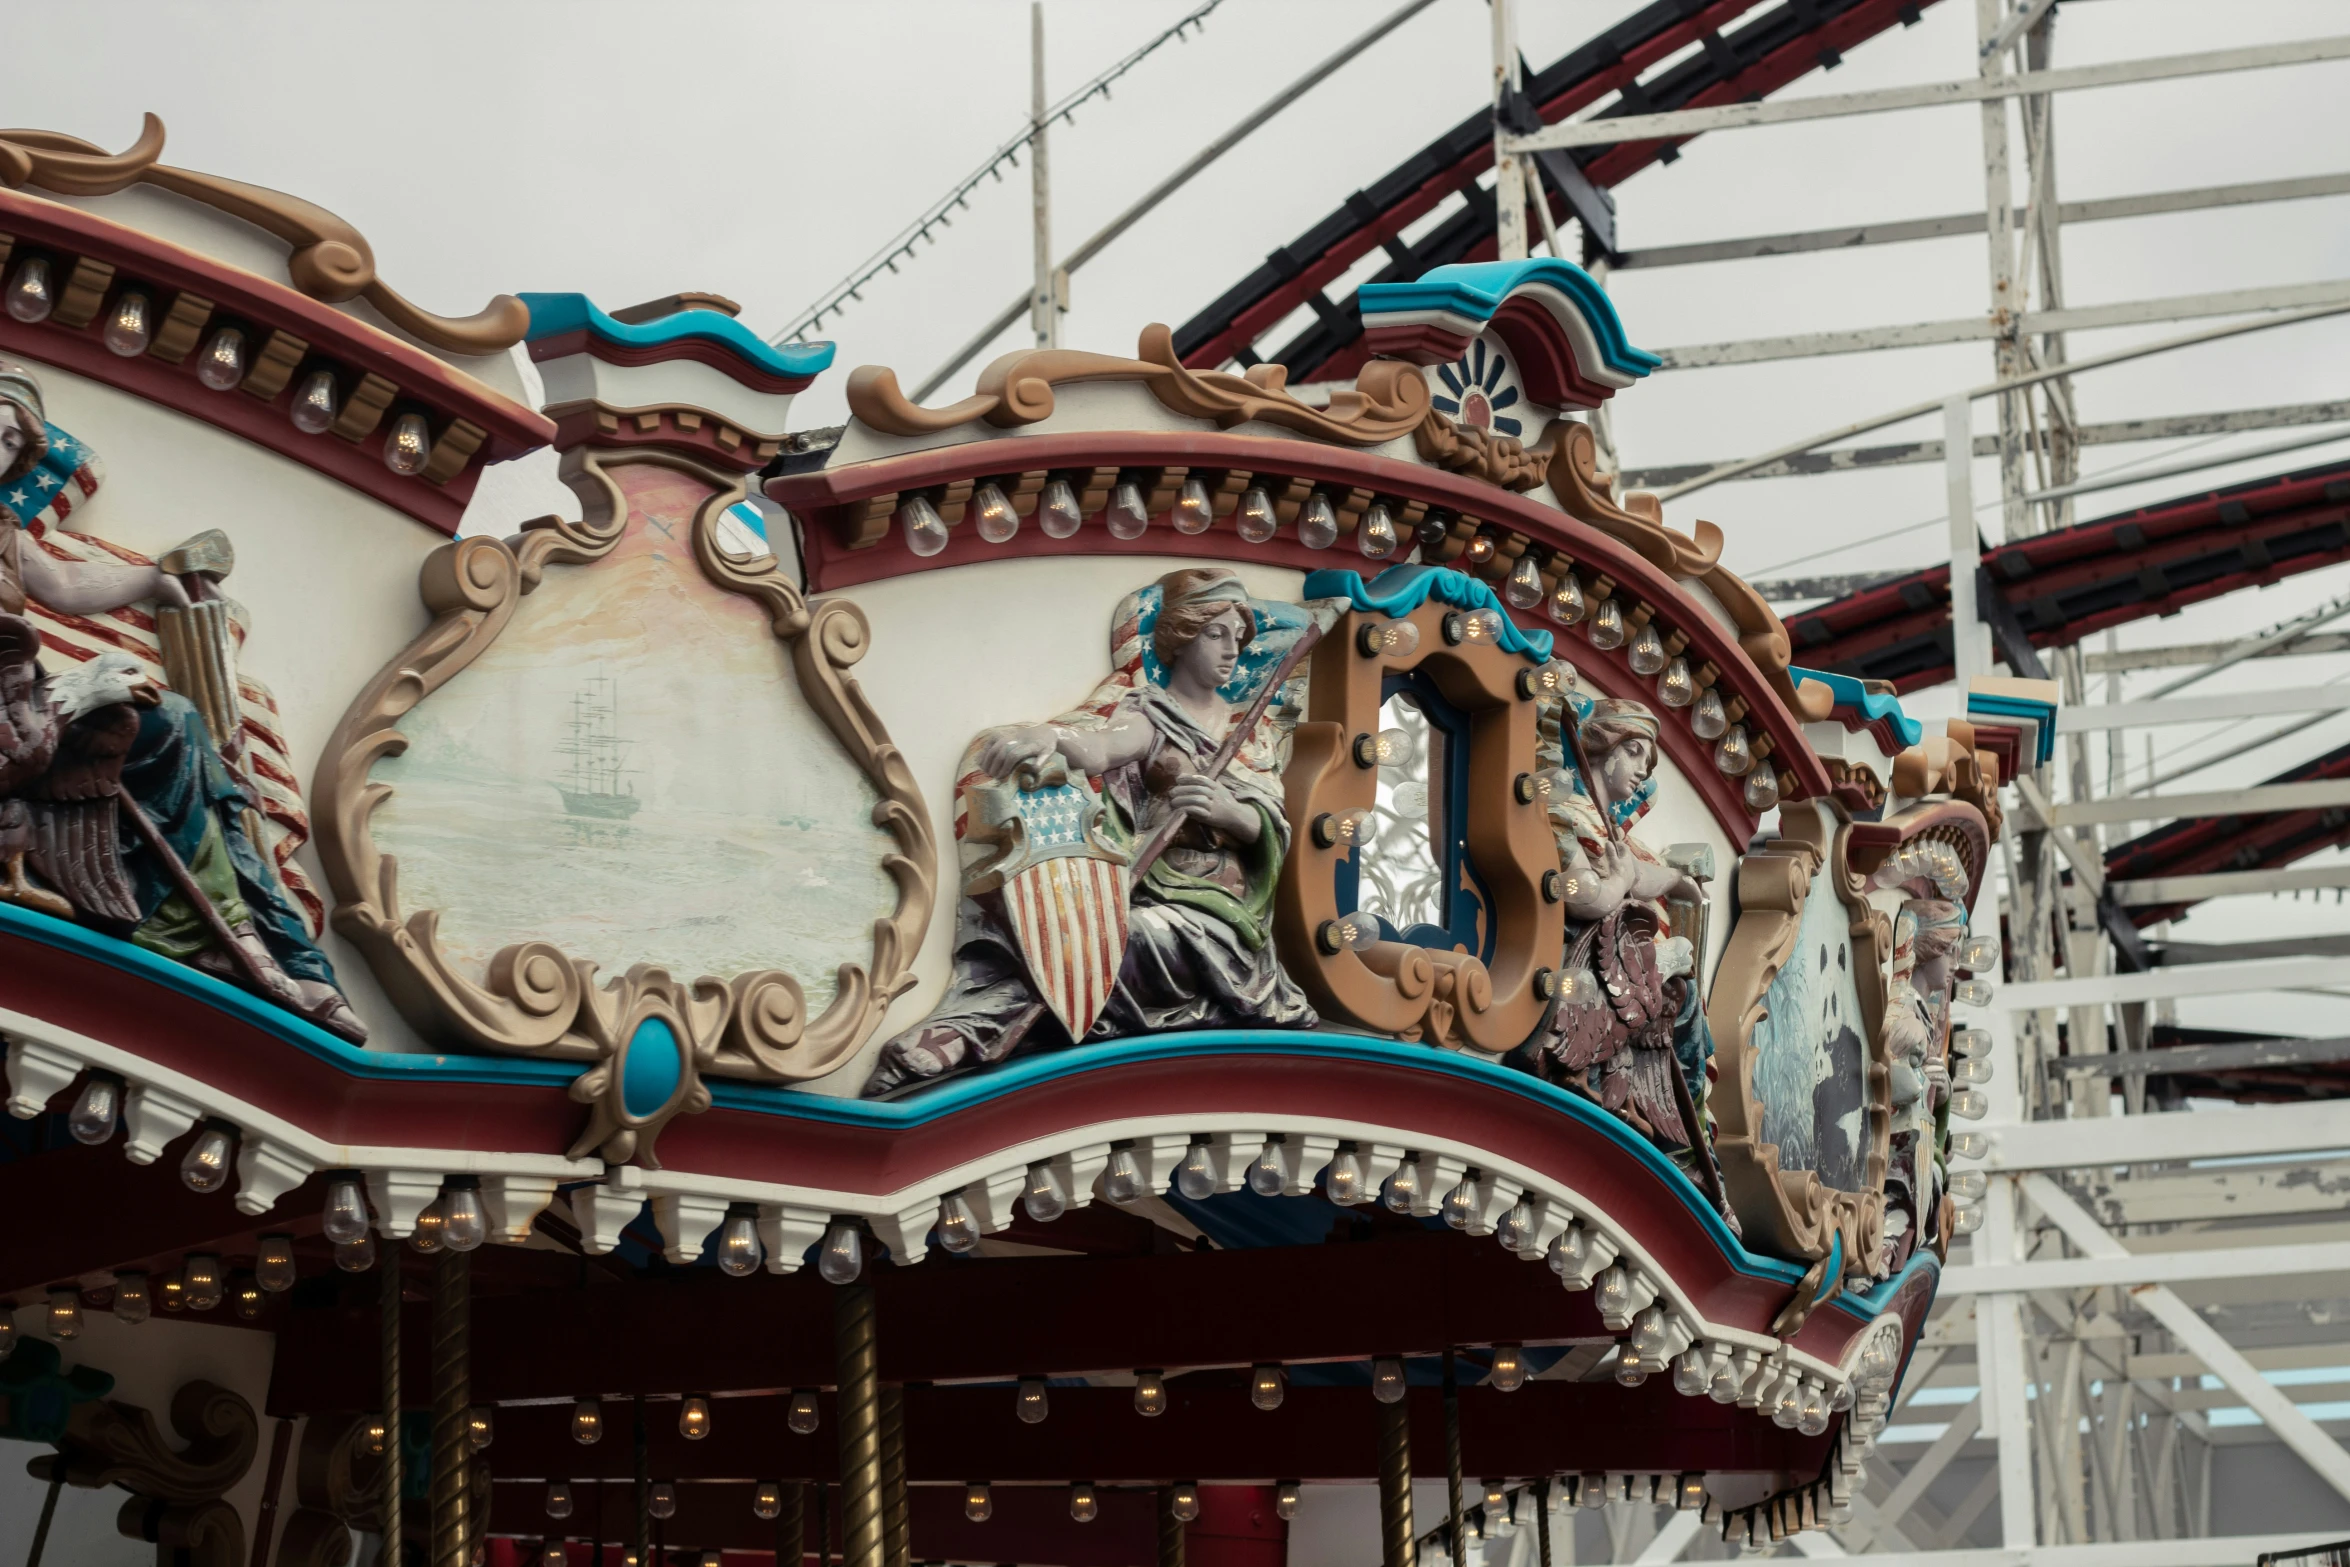 a merry go round is decorated with carousels and carnival rides